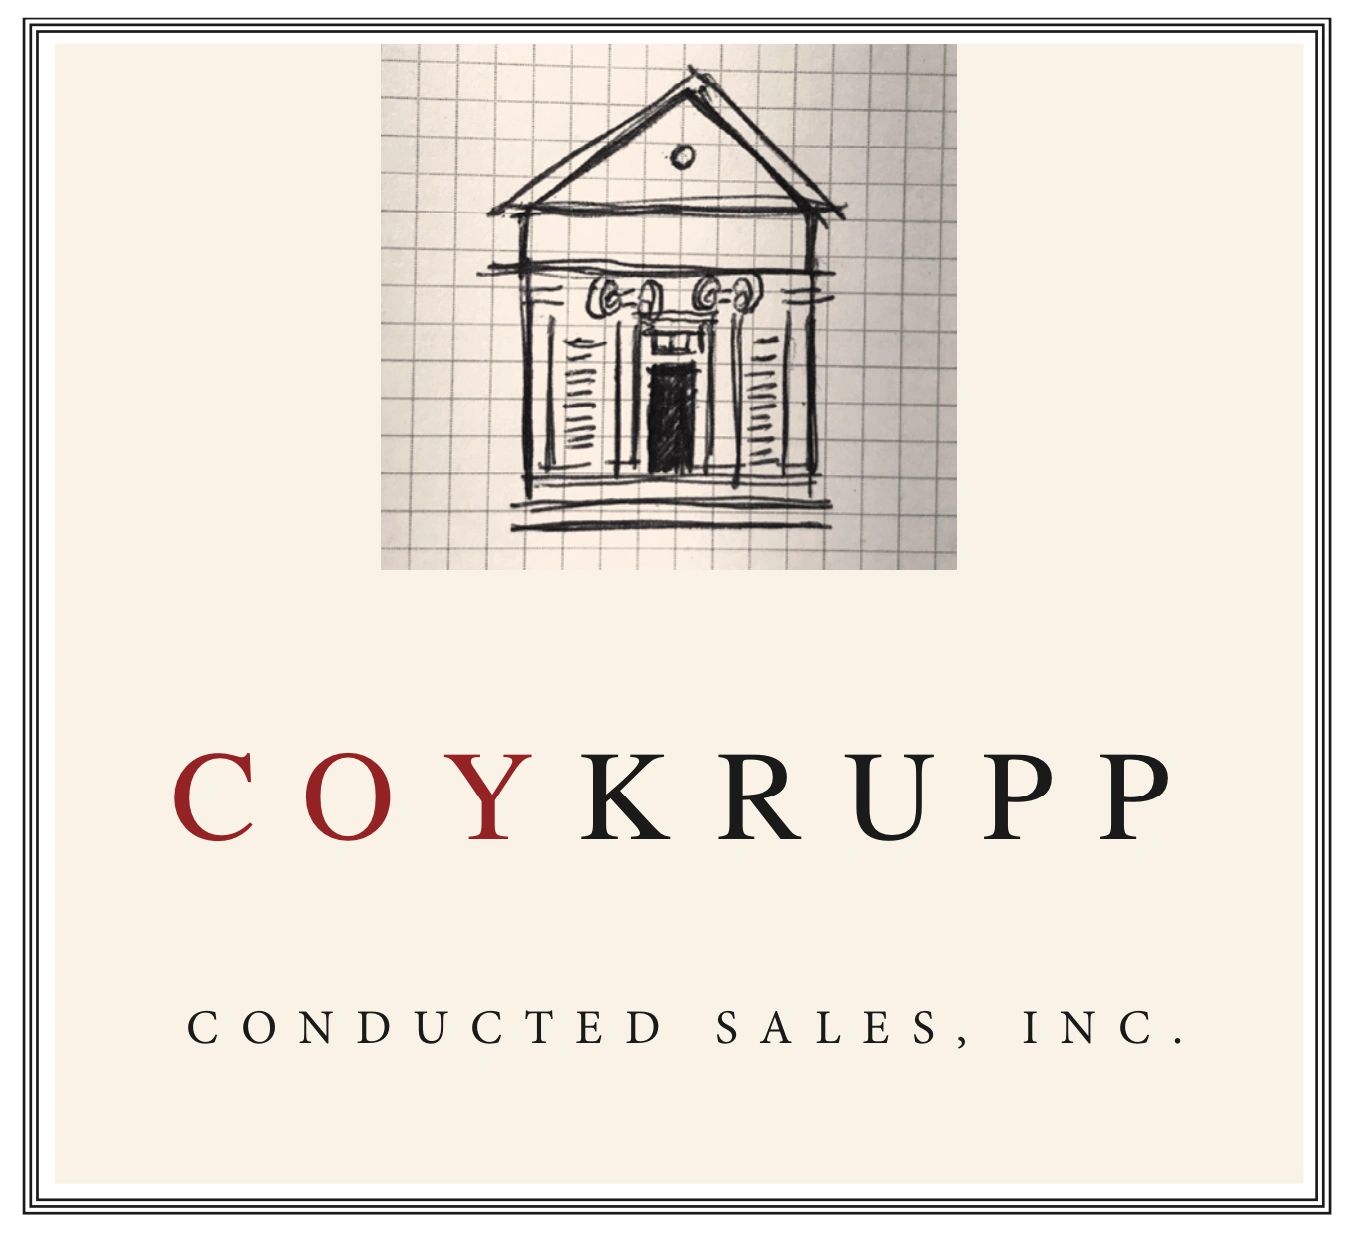 Coy-Krupp Conducted Sales